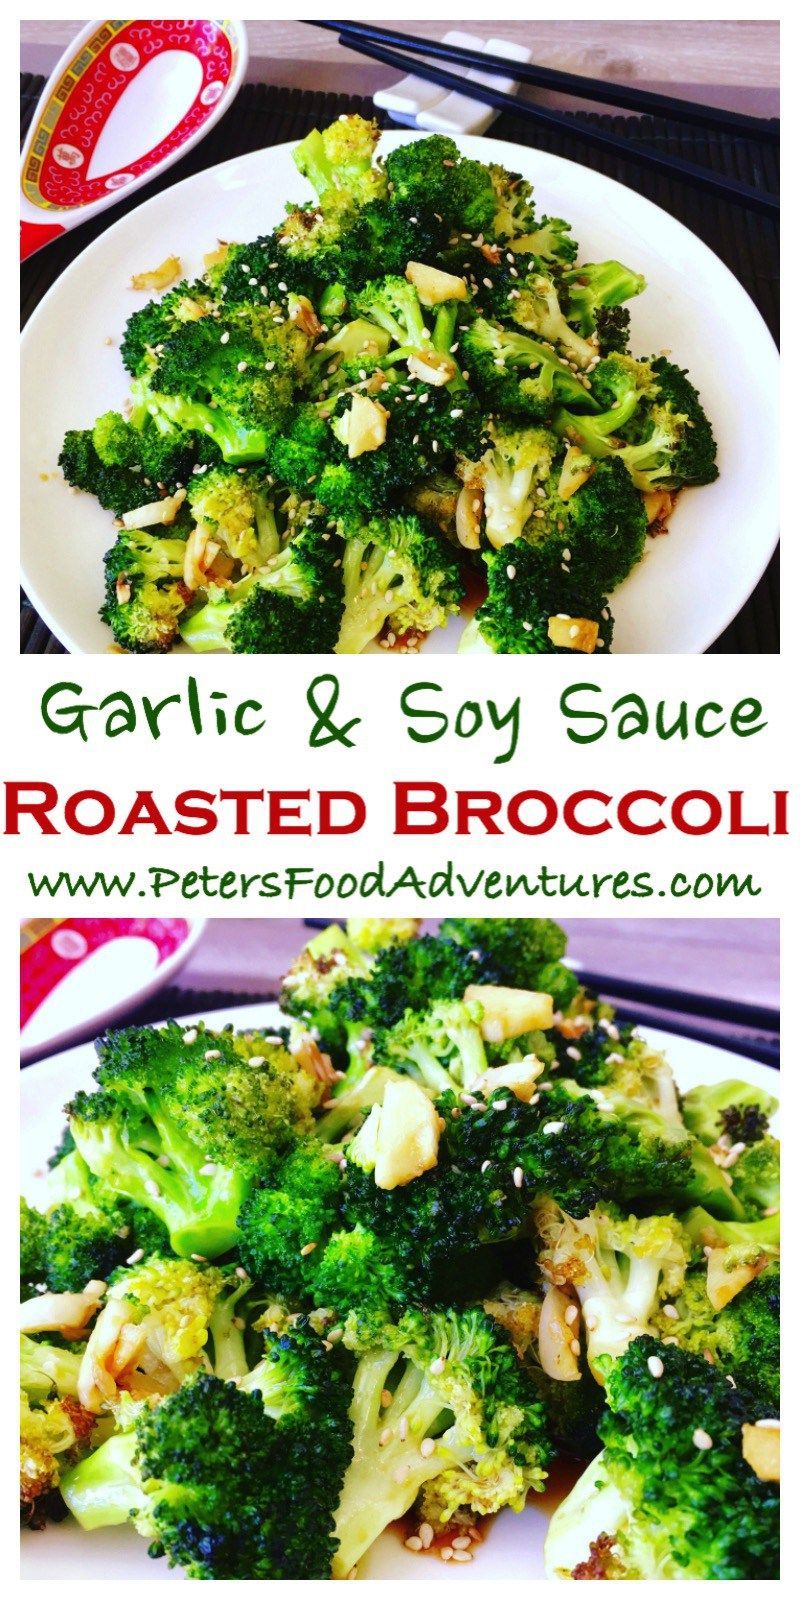 Super easy and delicious. Chinese style, oven roasted, flavourful and packed full of vitamins. The best broccoli side dish you